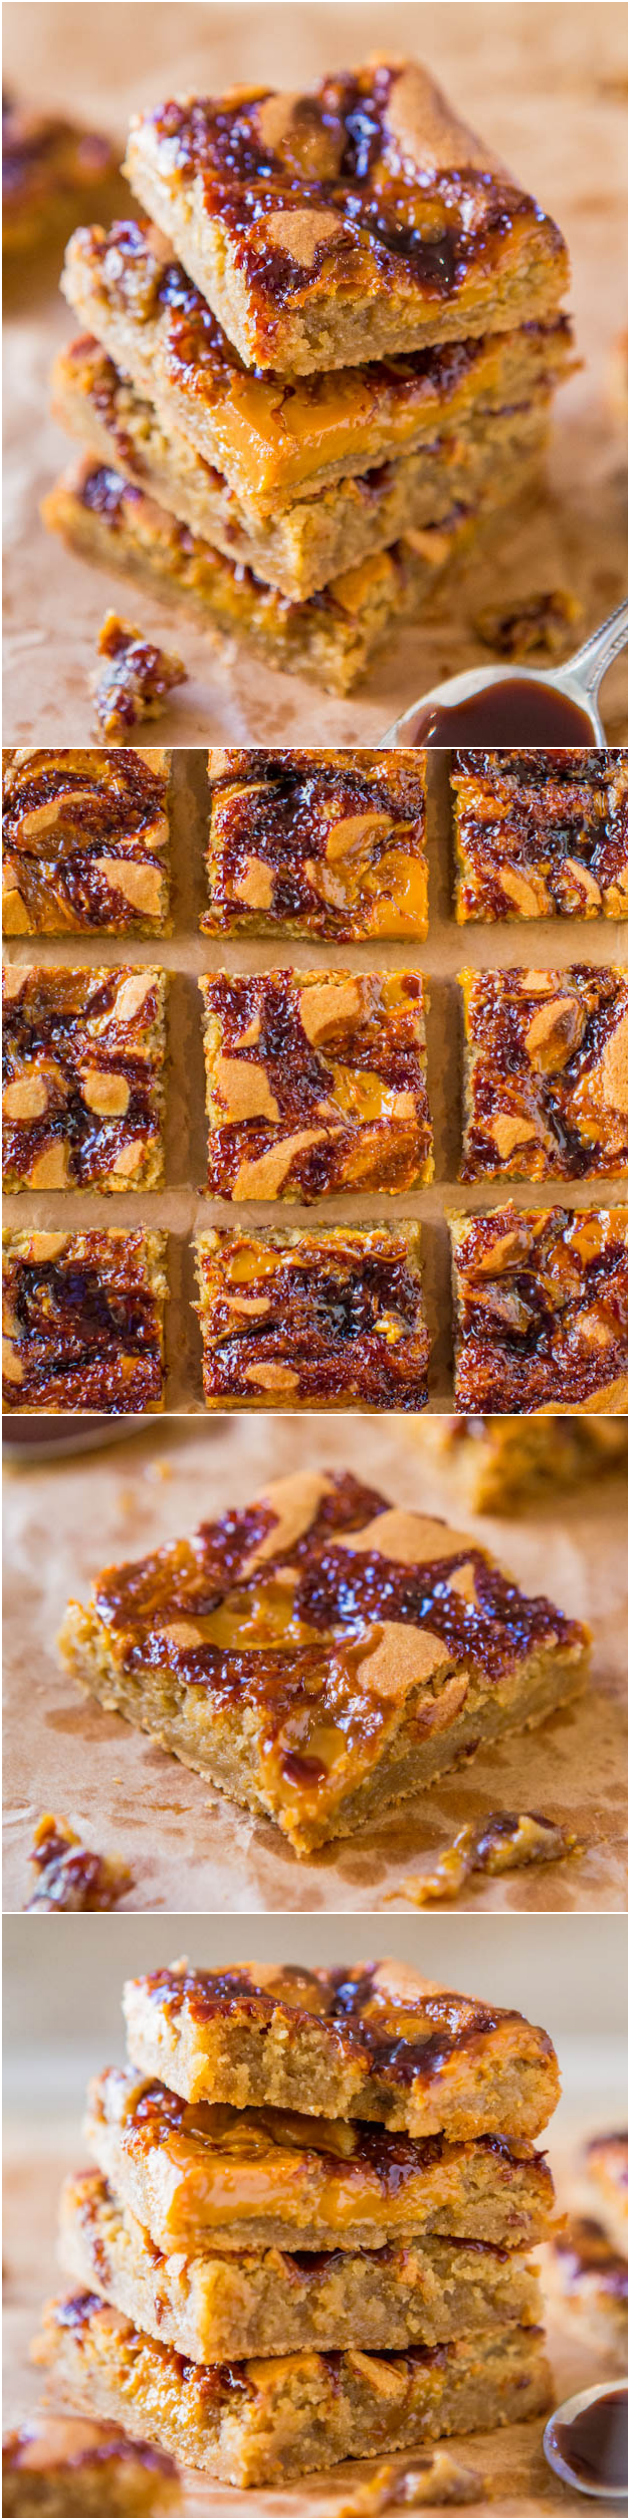 Hot Fudge and Salted Caramel Blondies - Two favorite ice cream toppings baked into soft, chewy & gooey bars! Easy recipe at averiecooks.com